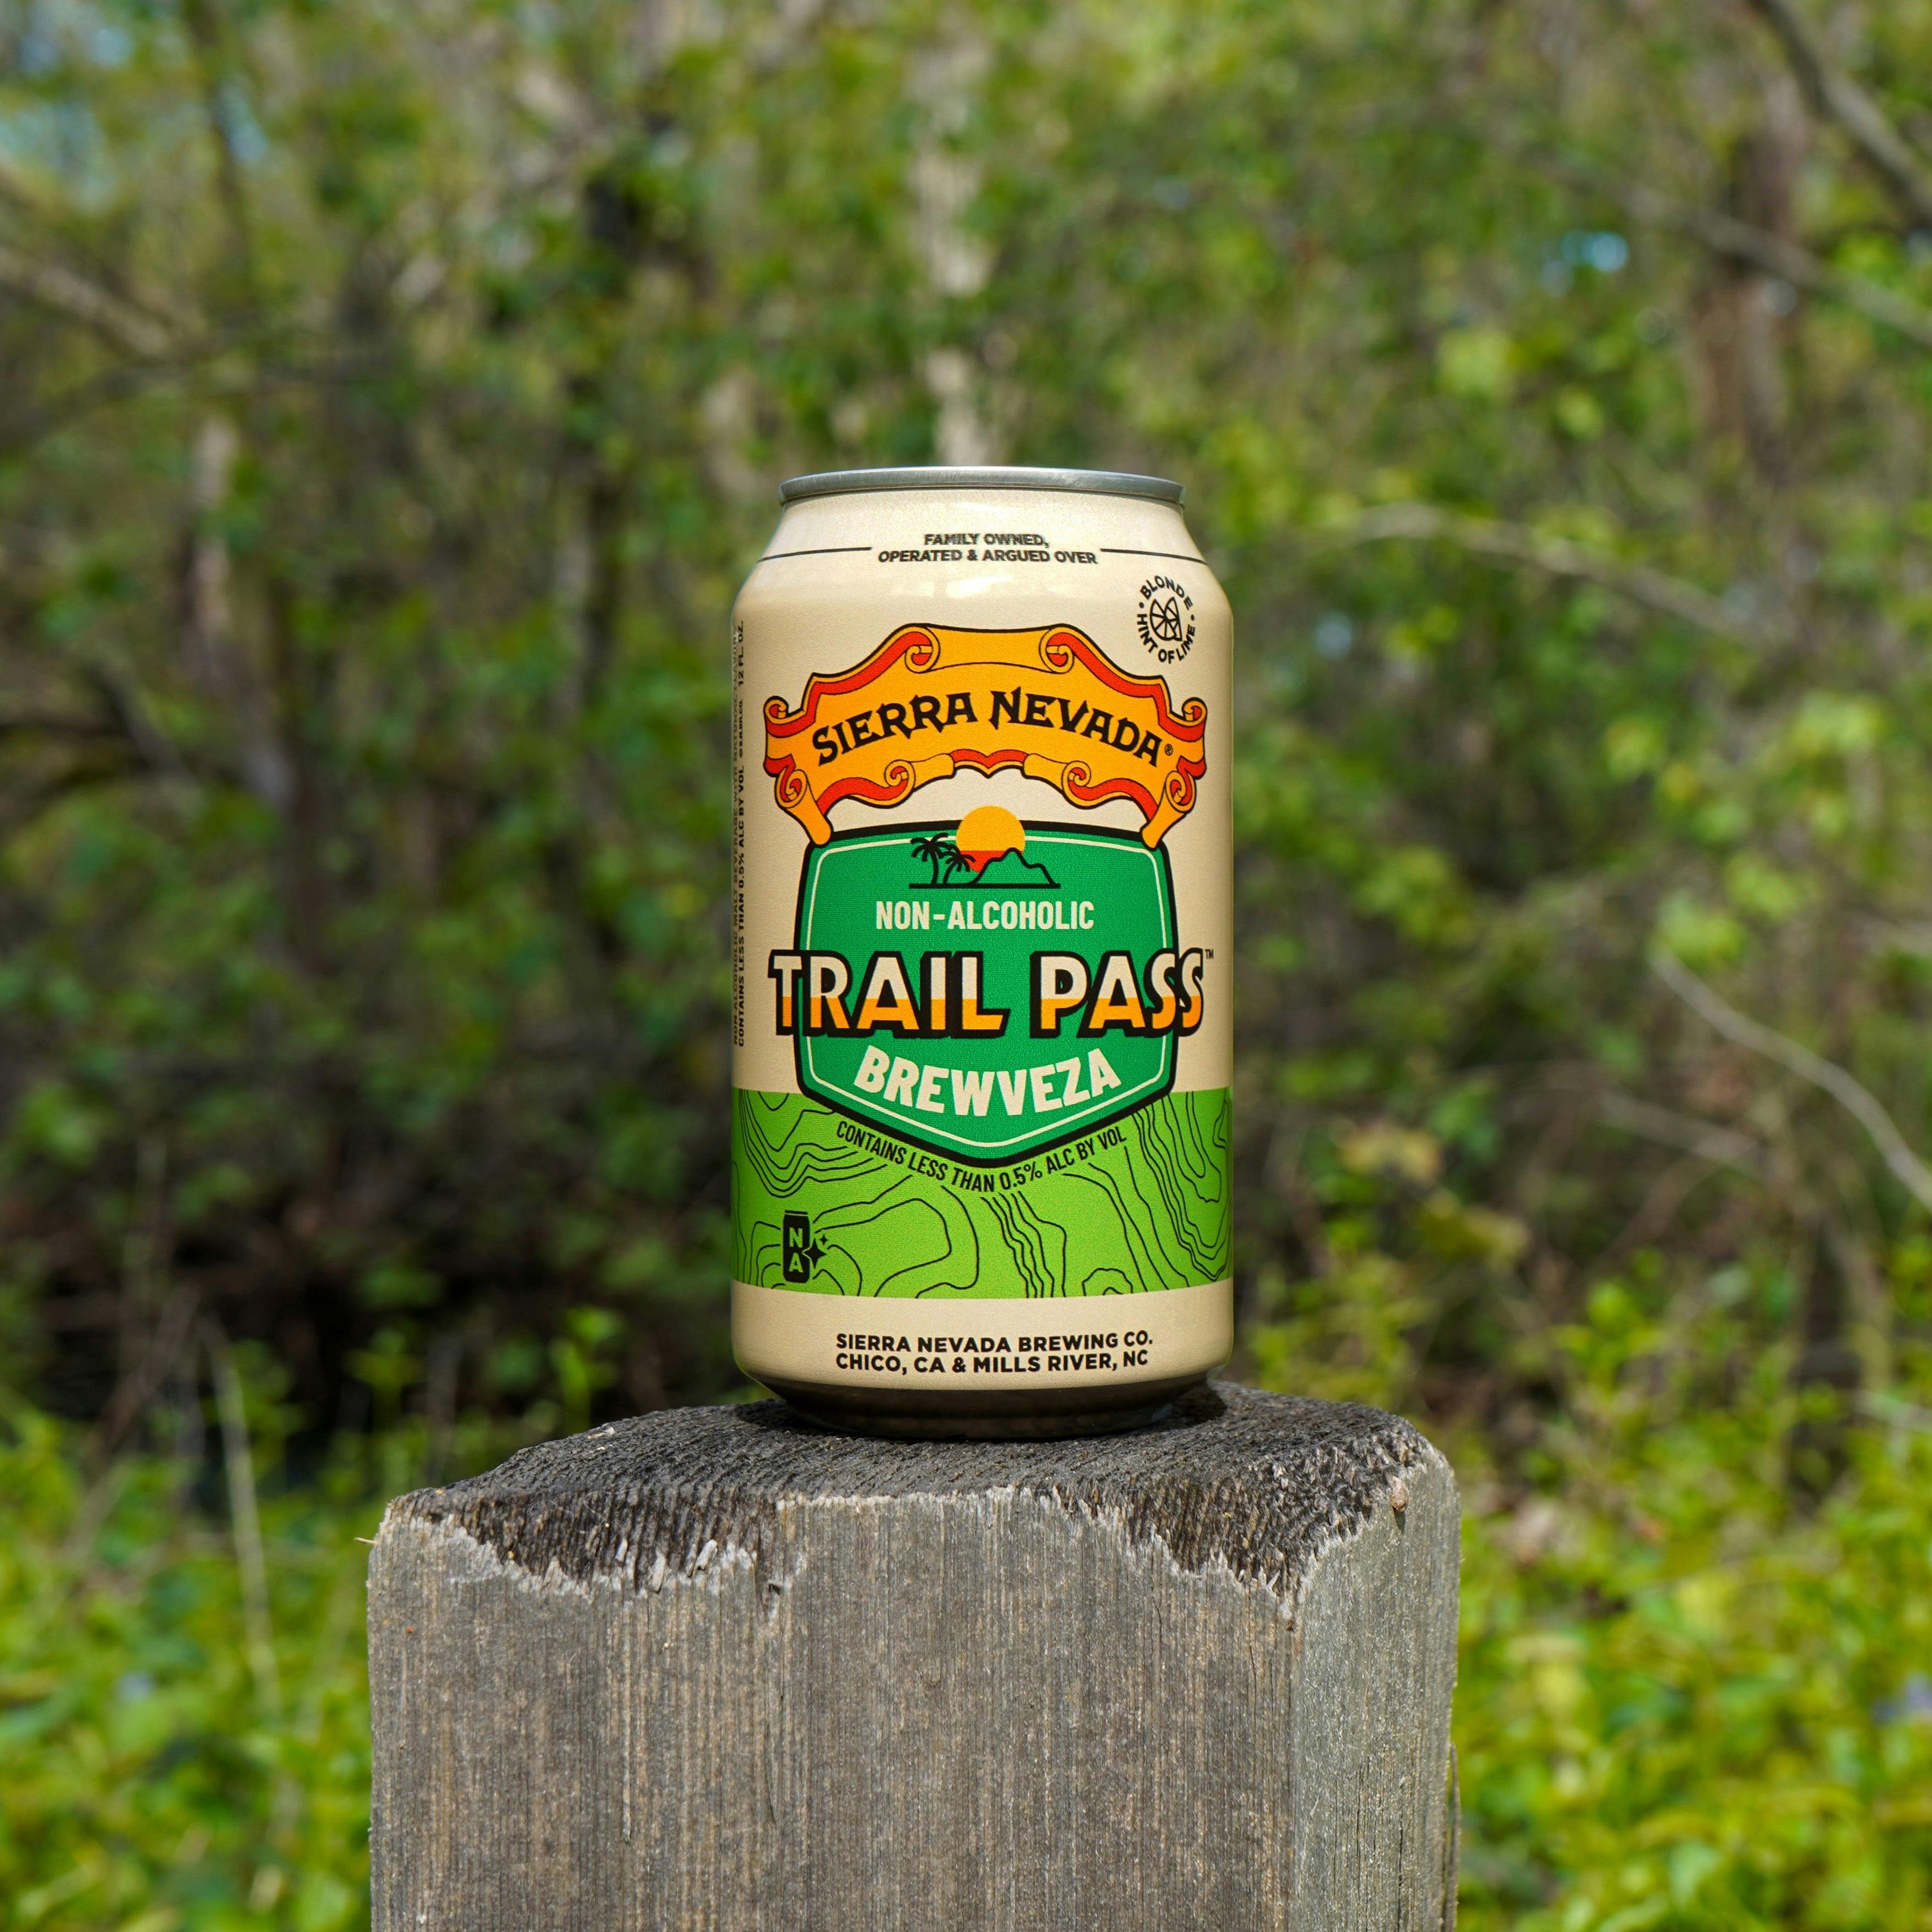 Sierra Nevada Trail Pass Brewveza can perched on top of a wooden fence post in front of a wooded area